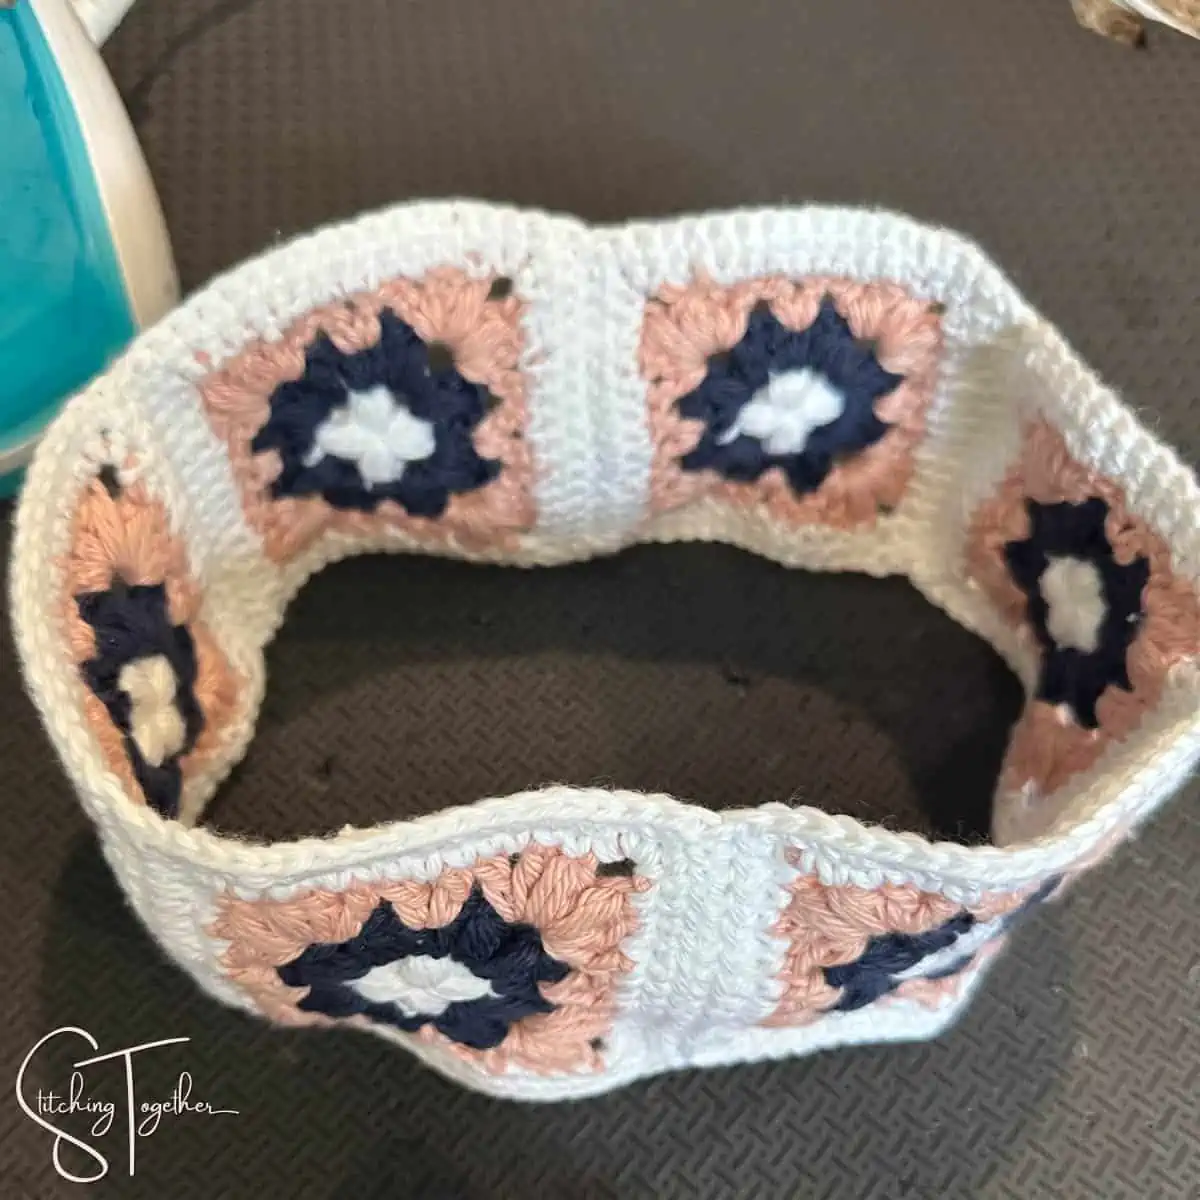 granny squares joined together in a ring